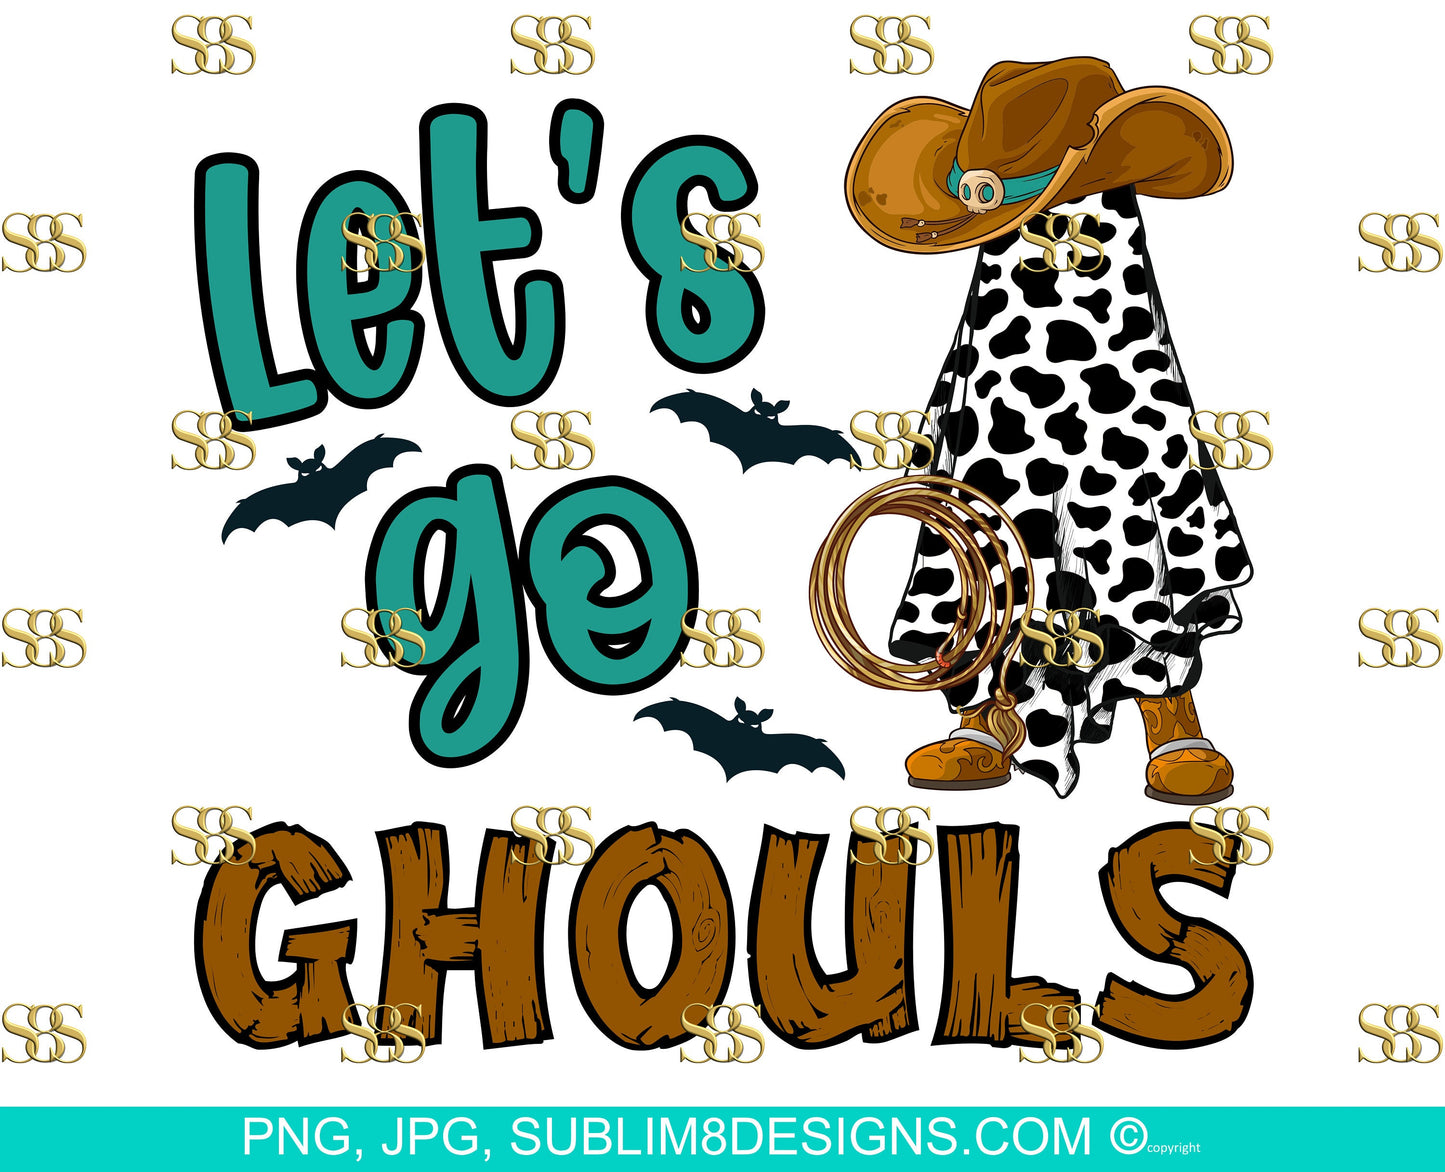 Lets Go Ghouls Halloween Cowboy Cow PNG and JPG ONLY